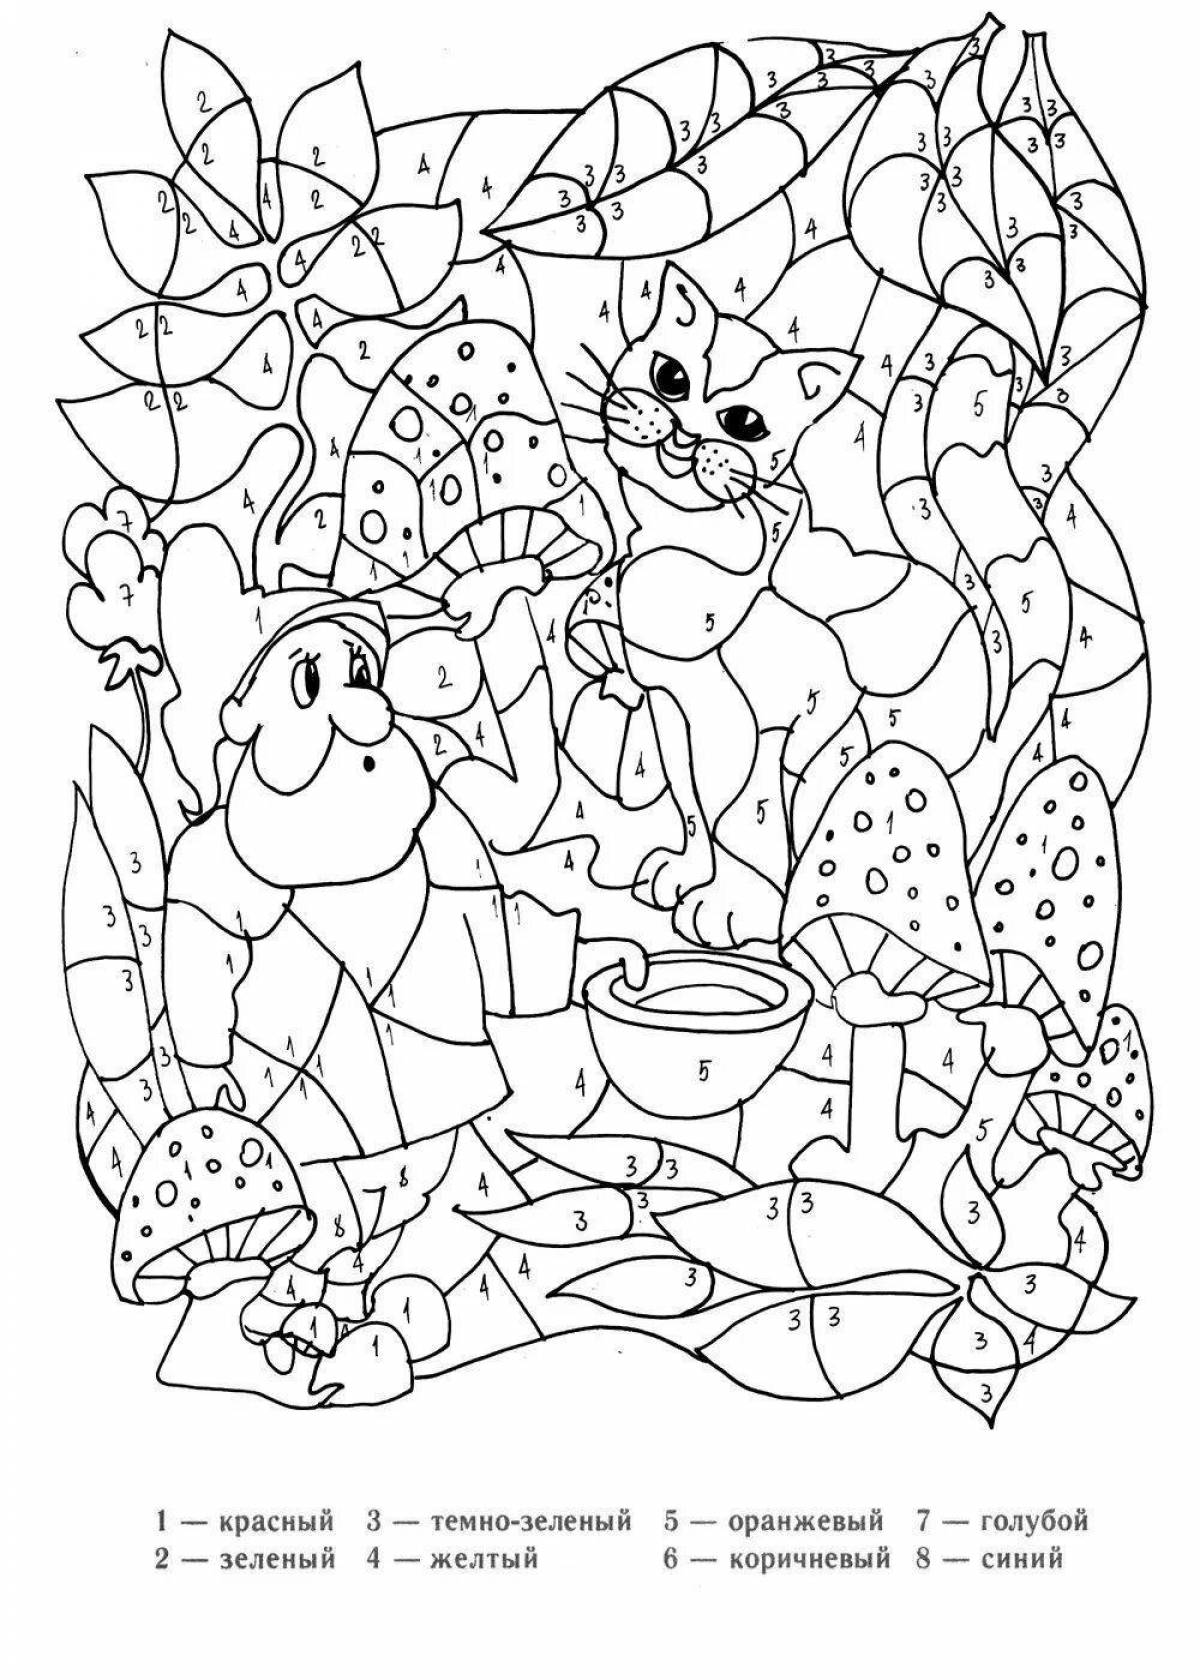 Radiant coloring page сказки по номерам